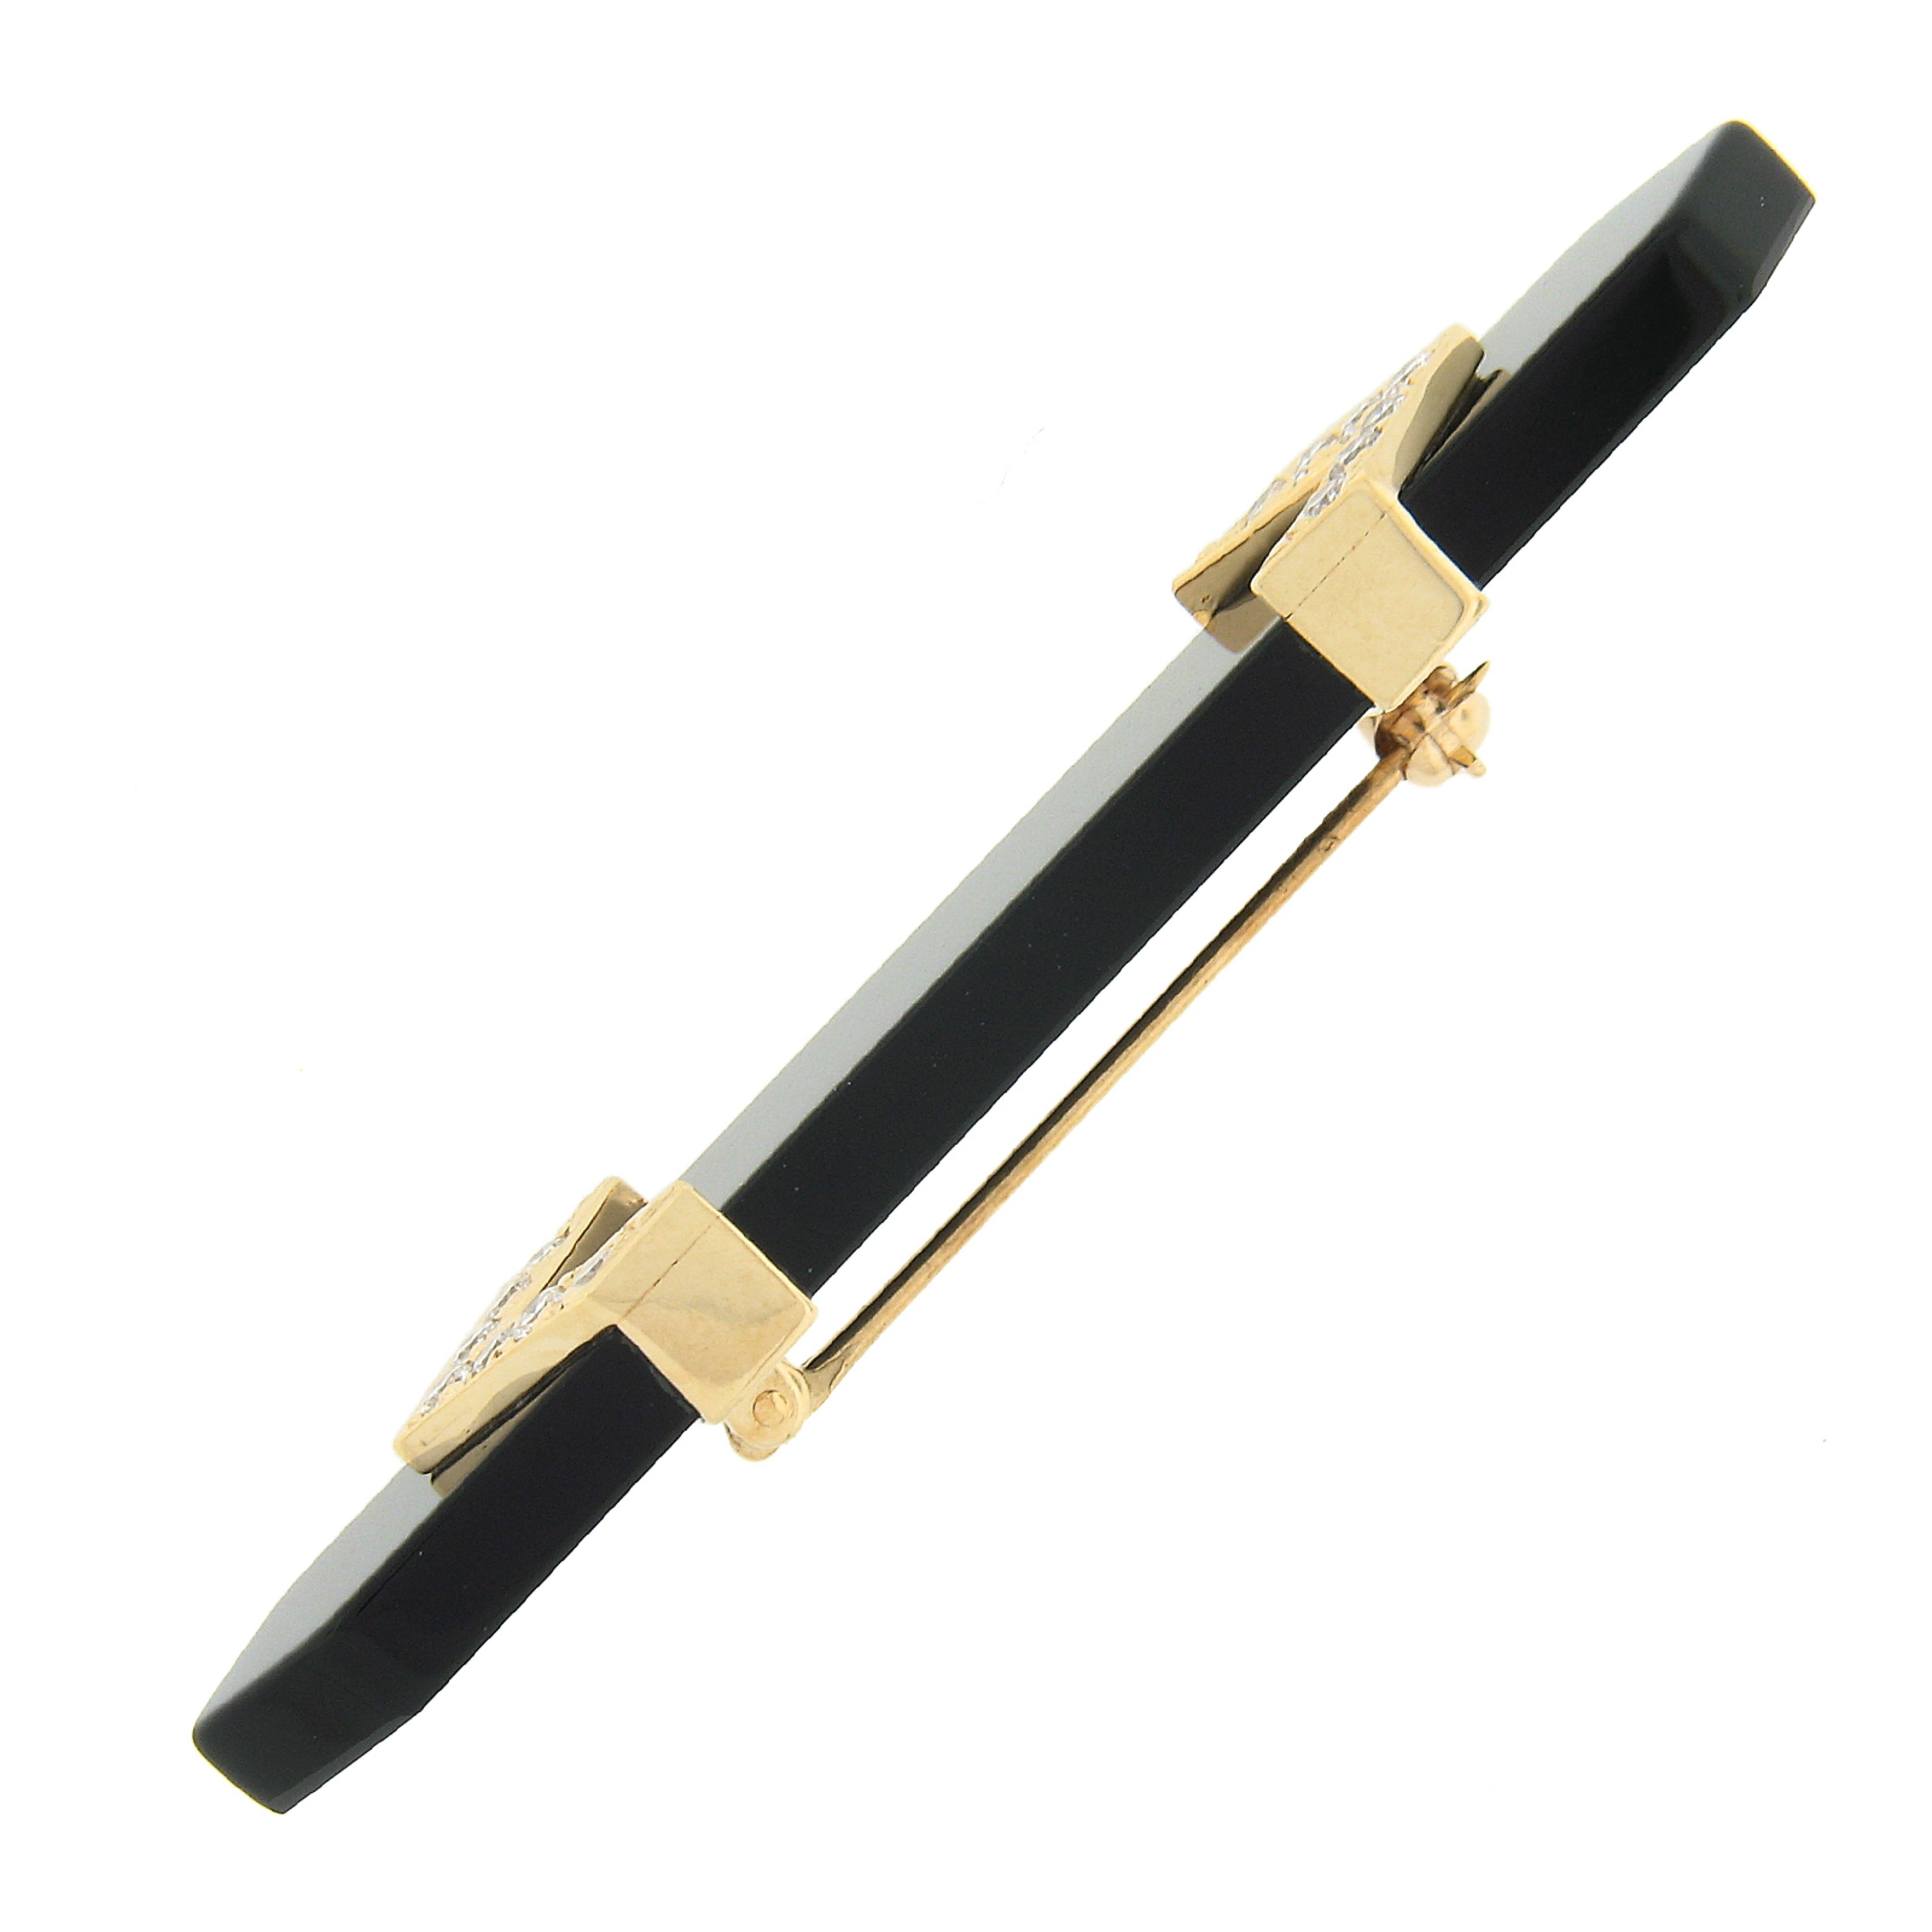 Vintage 14k Gold Black Onyx Bar Pin Brooch Accented w/ 0.42ctw Diamond 2 Arrows For Sale 1